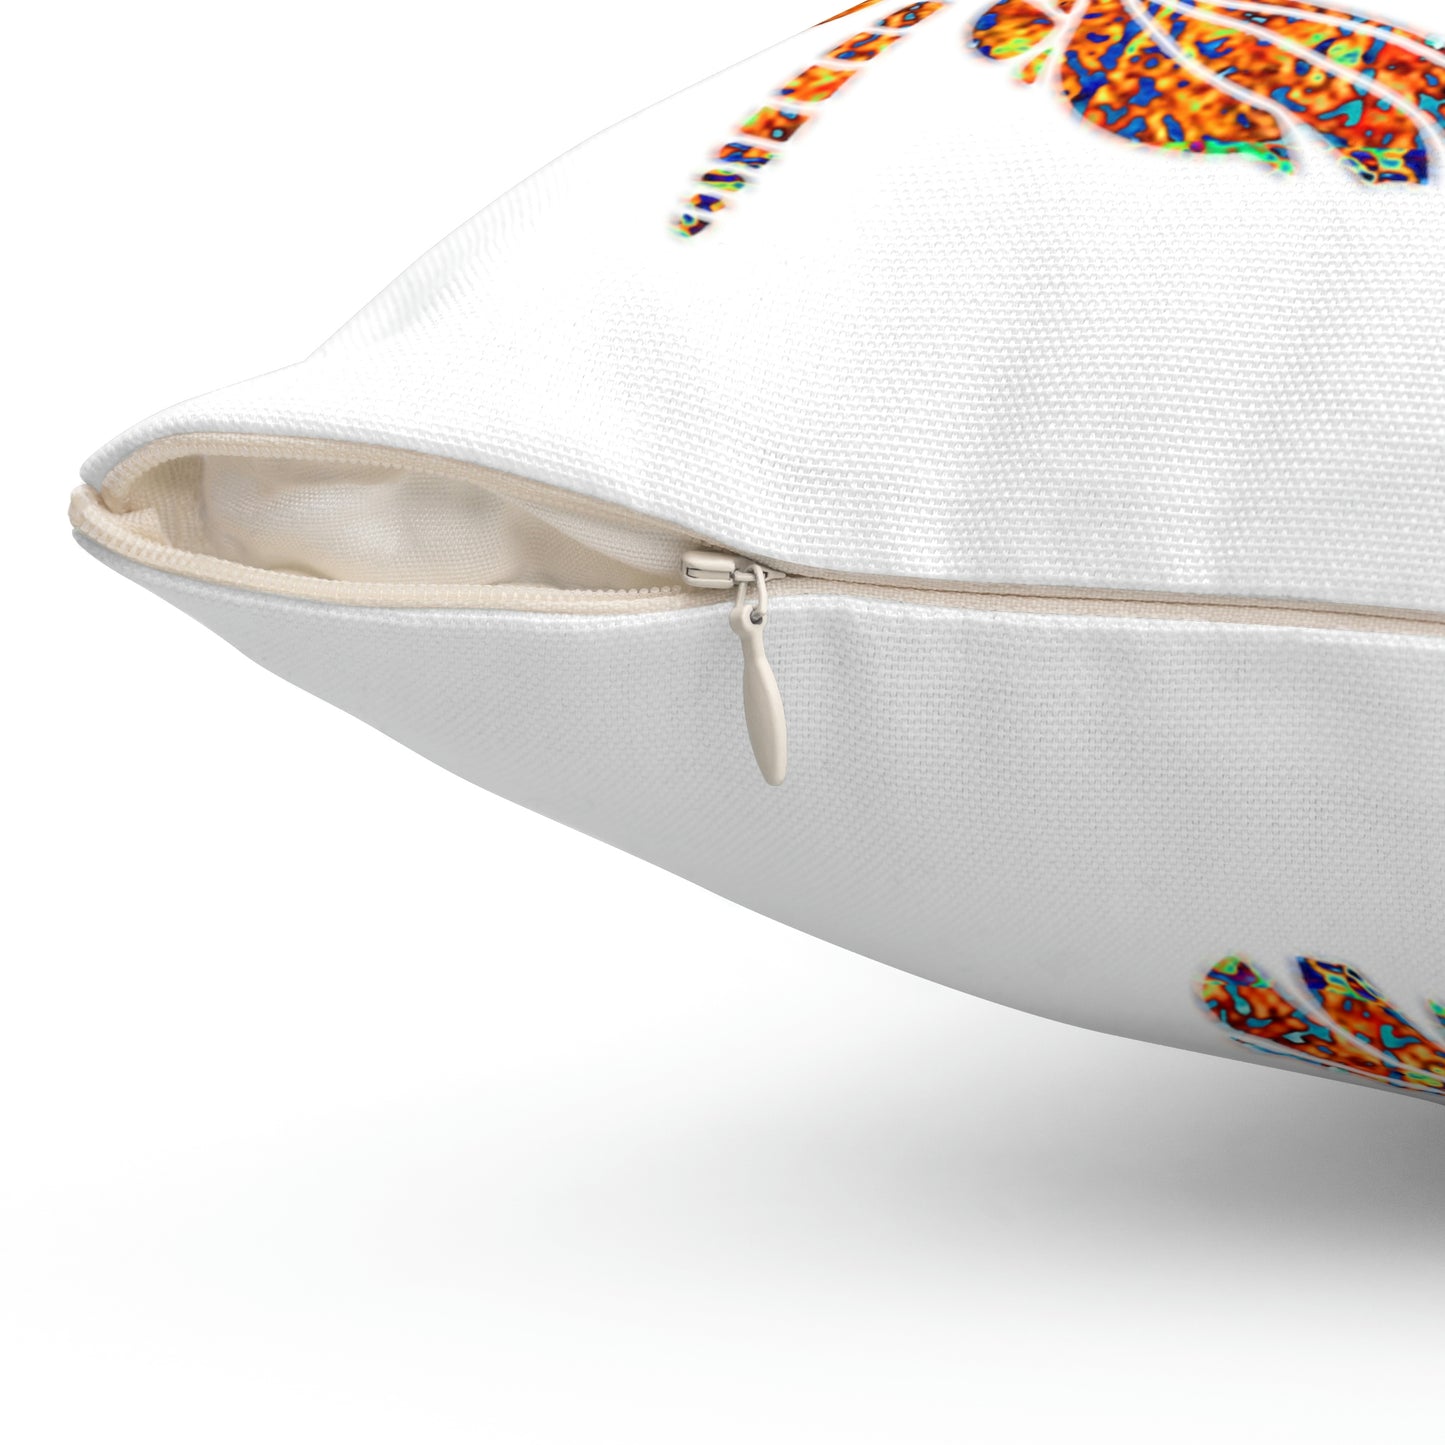 Minimalist square white pillow with 3 colorful Dragonflies print zipper close up